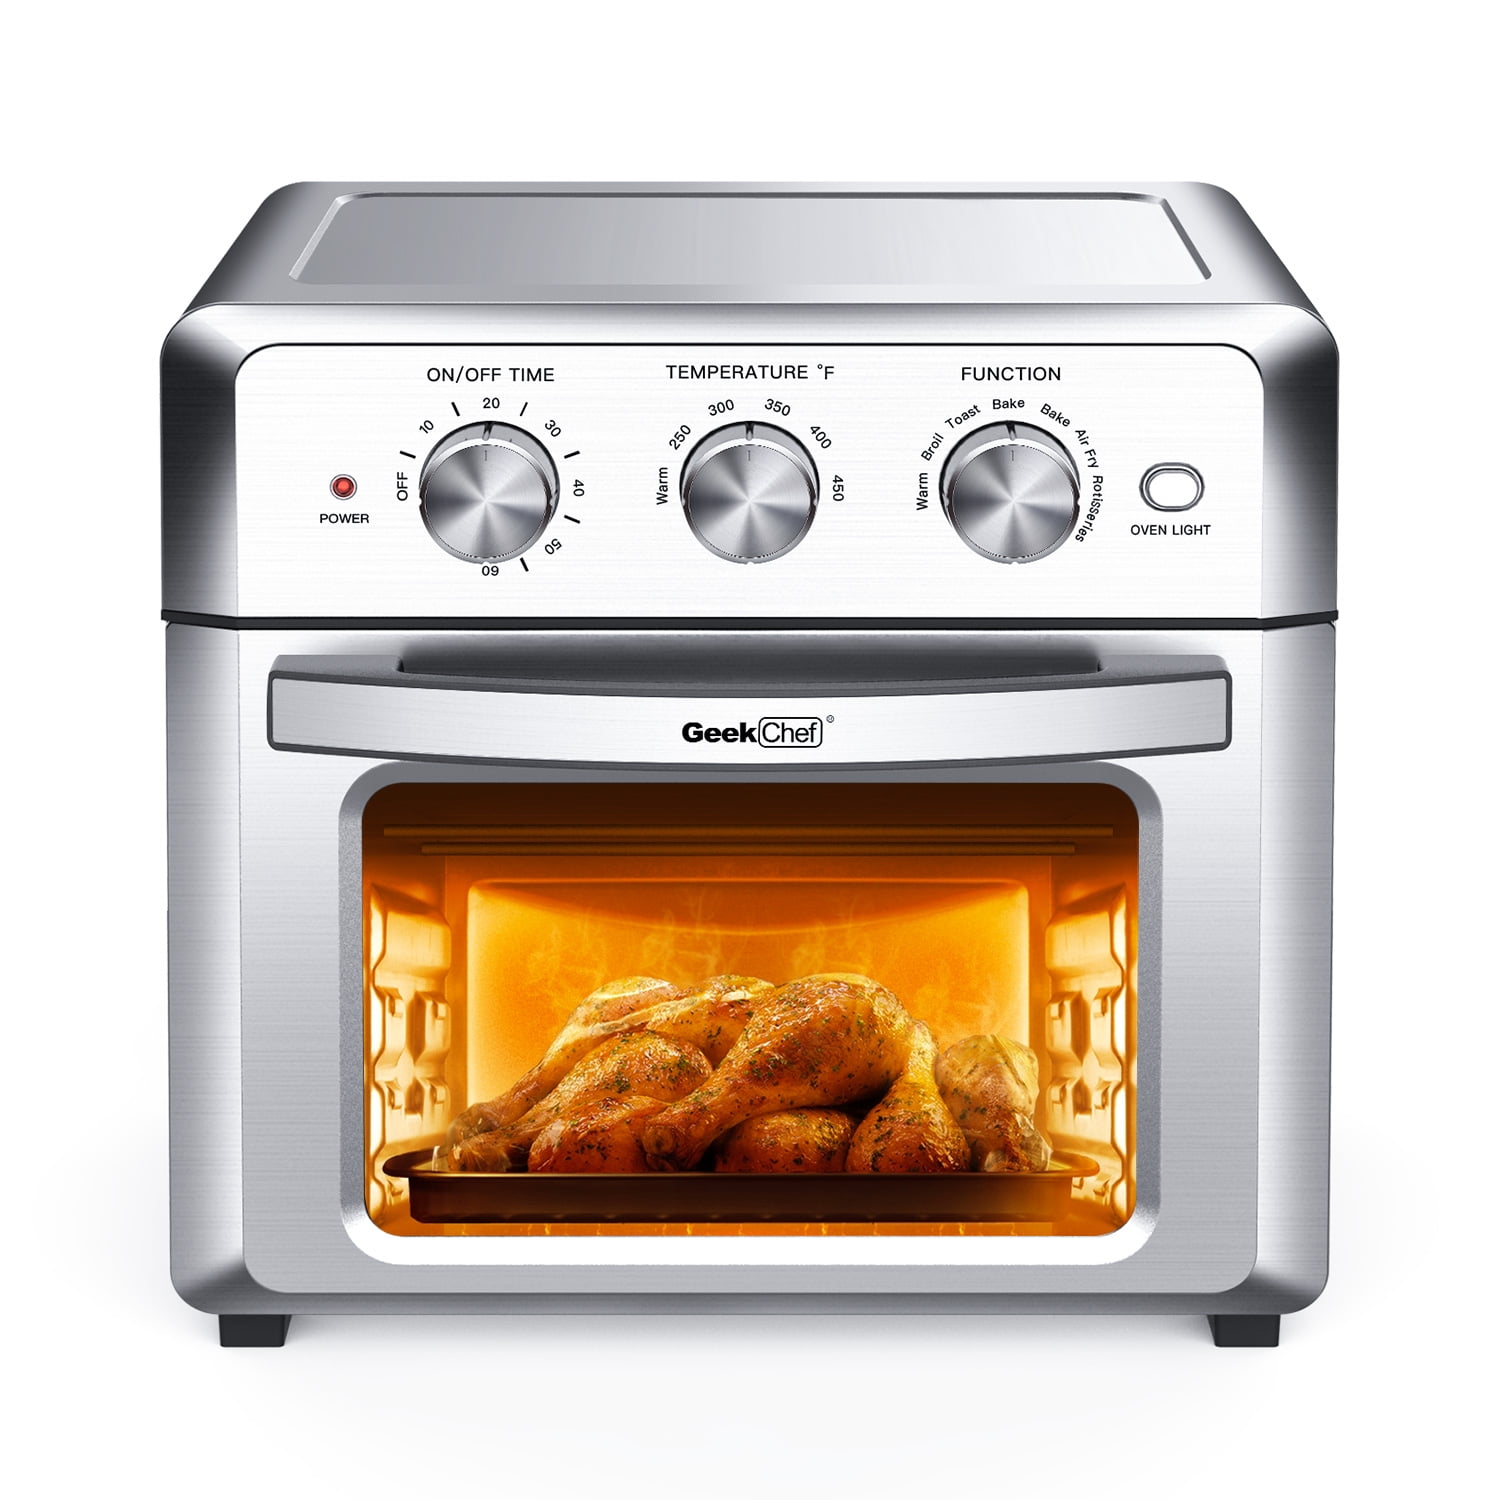  Toaster Oven Air Fryer Combo, AUMATE Kitchen in the box Countertop  Convection Oven, Airfryer,Knob Control Pizza Oven with Timer/Auto-Off, 4  Accessories and Recipe Included,1550W,19 QT, Stainless Steel: Home & Kitchen